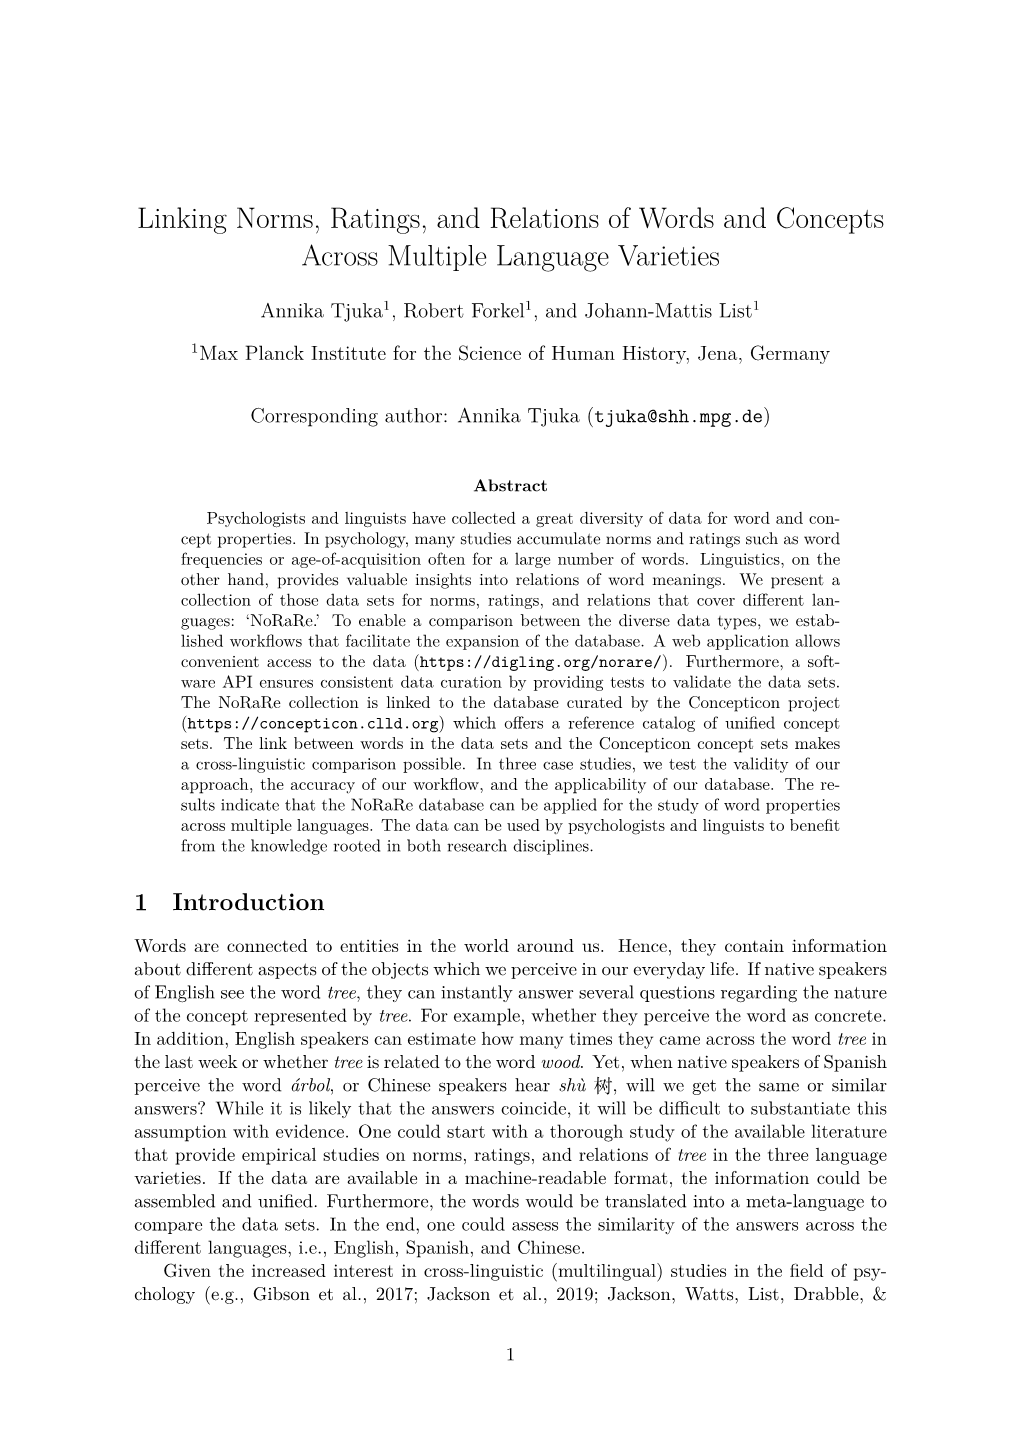 Linking Norms, Ratings, and Relations of Words and Concepts Across Multiple Language Varieties